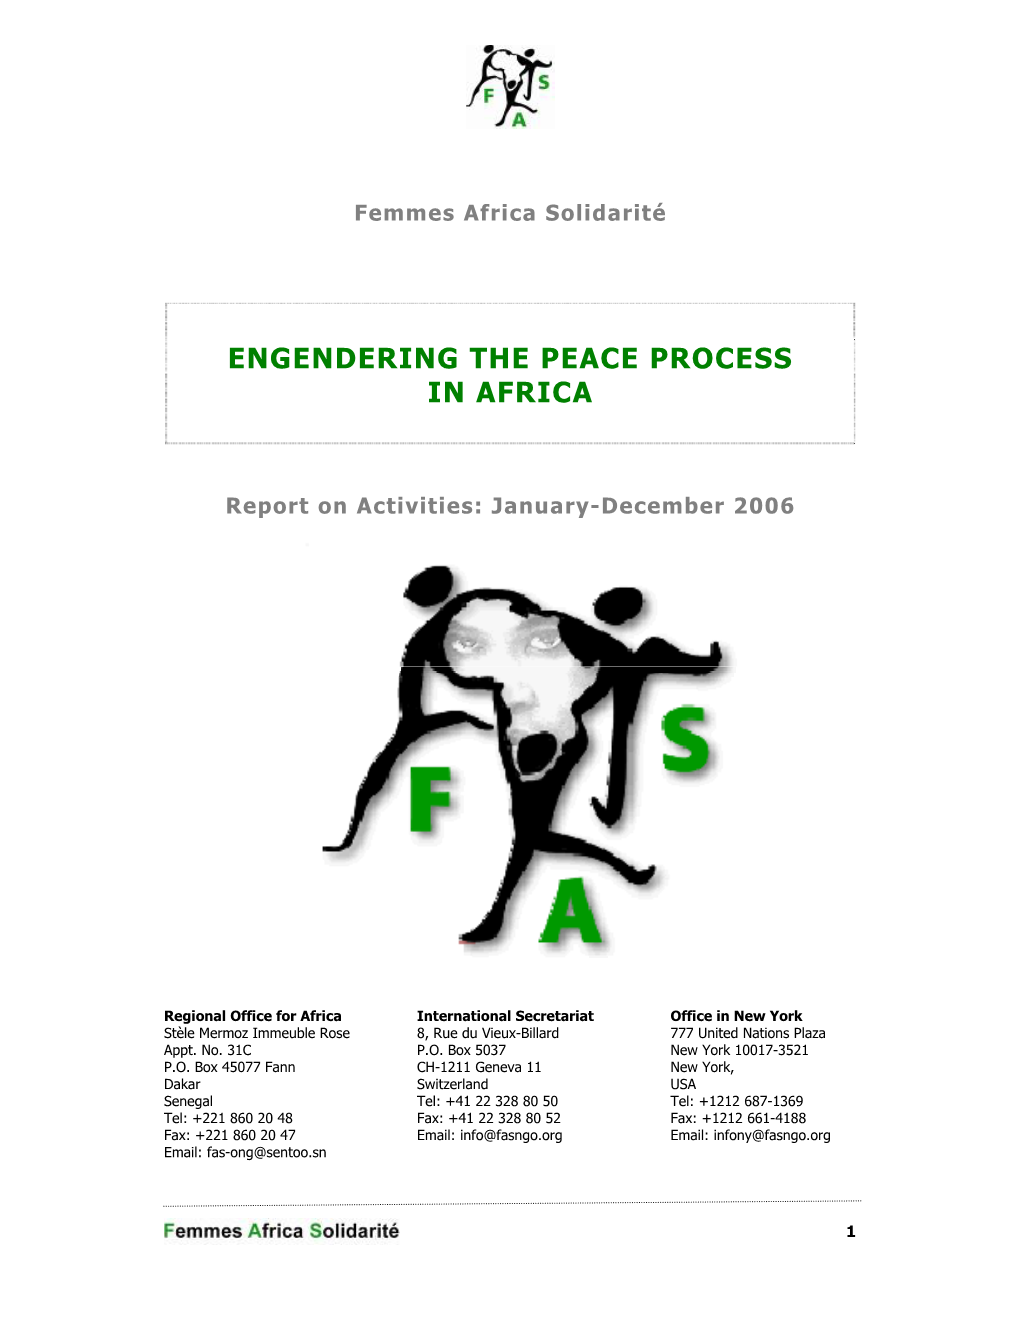 Engendering the Peace Process in Africa January-December 2006